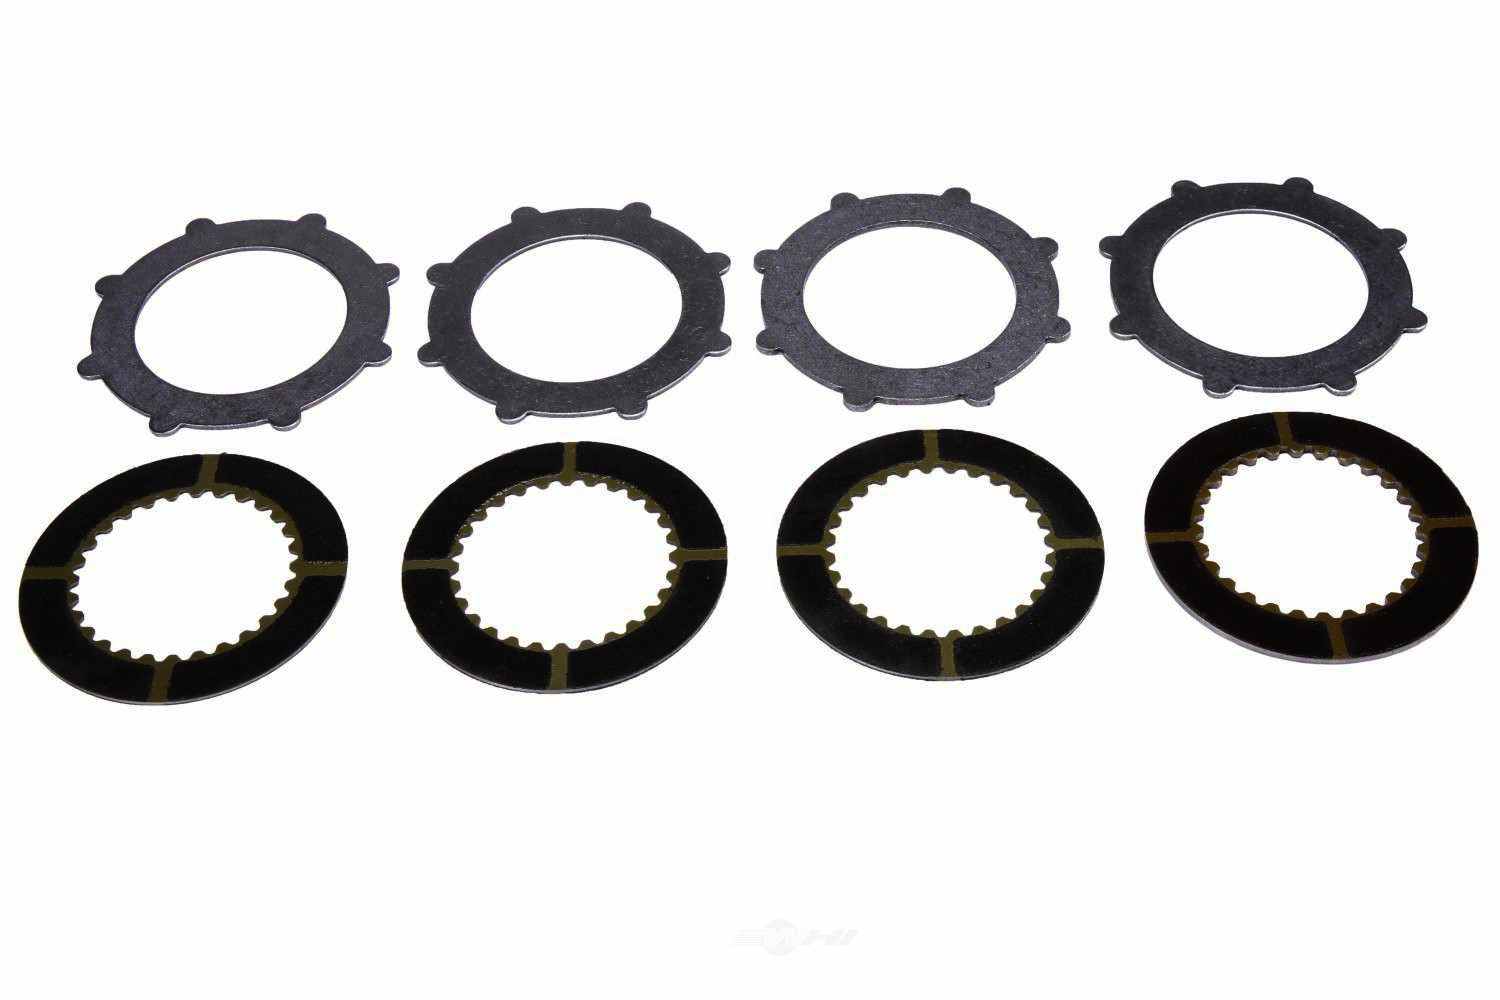 GM GENUINE PARTS - Differential Clutch Pack - GMP 23347694